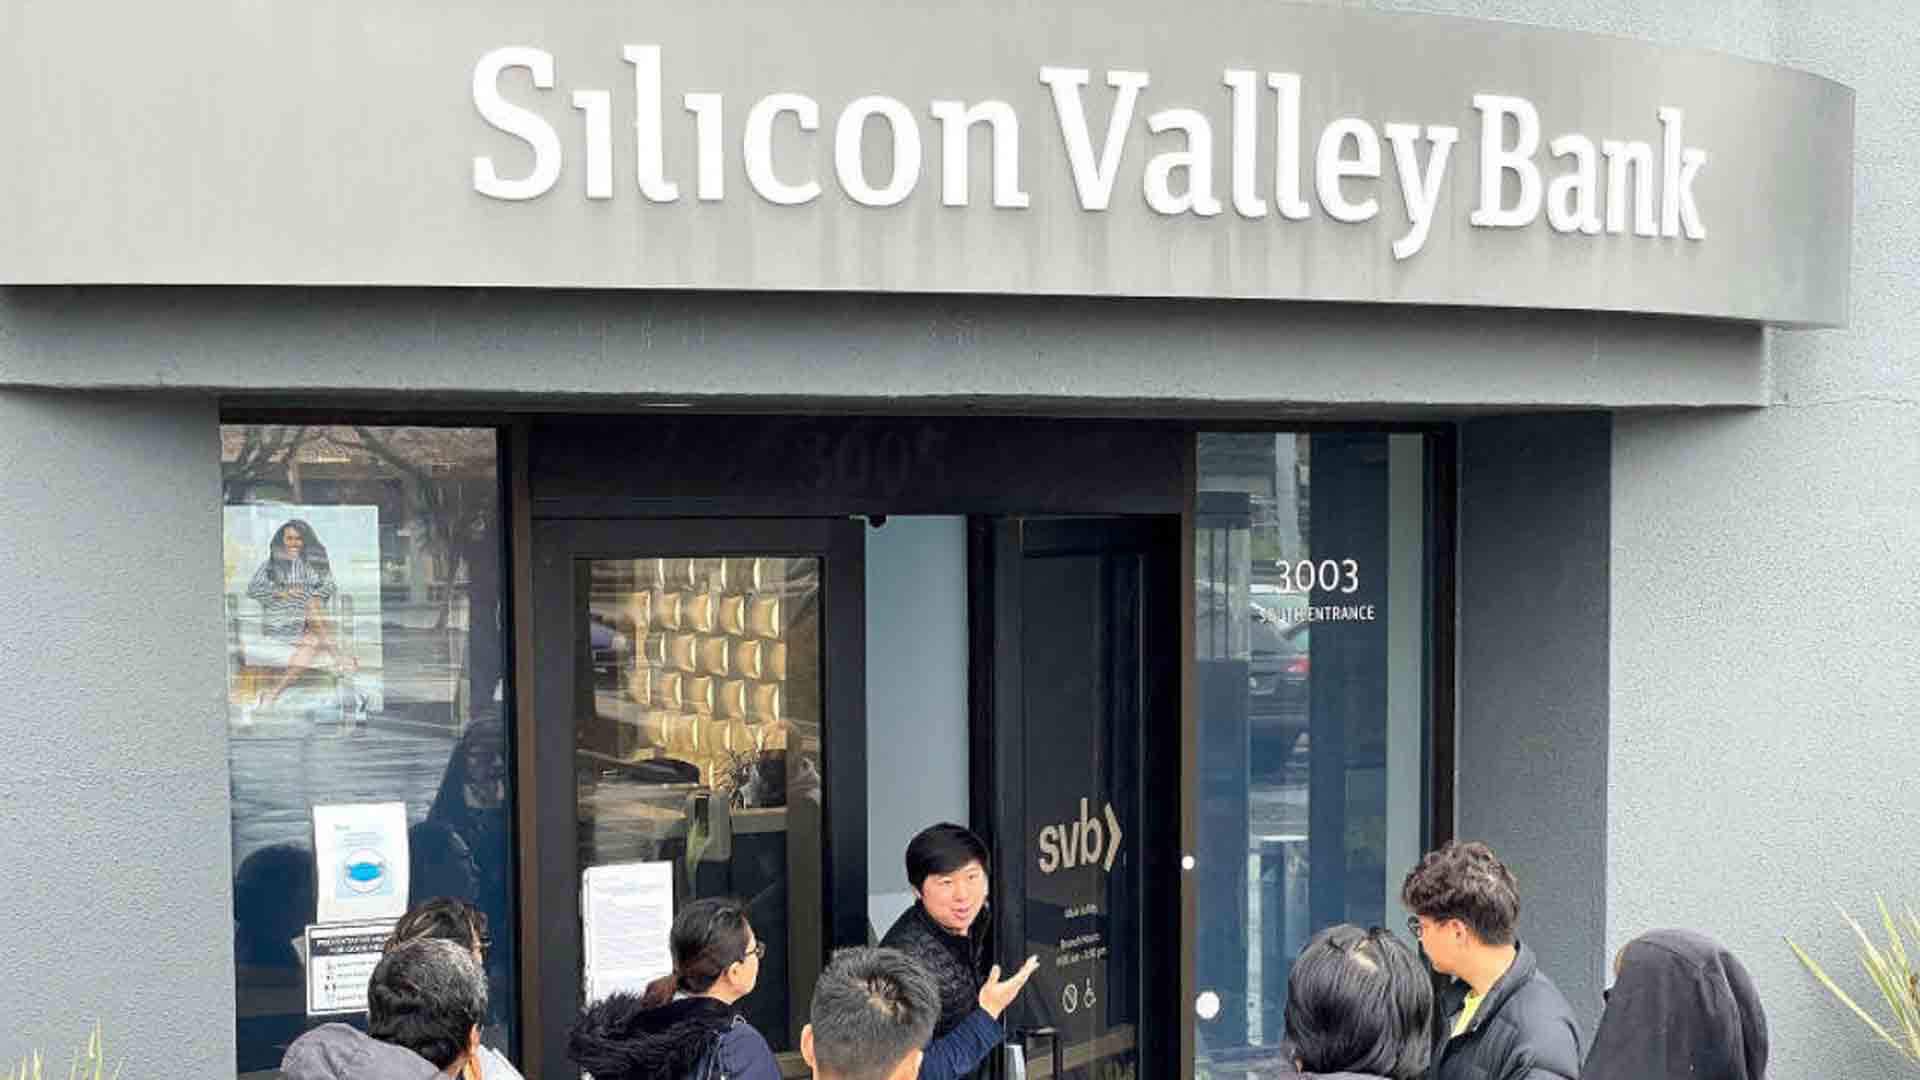 With Silicon Valley Bank's Collapse, Caution Emerges Over Regional Banks